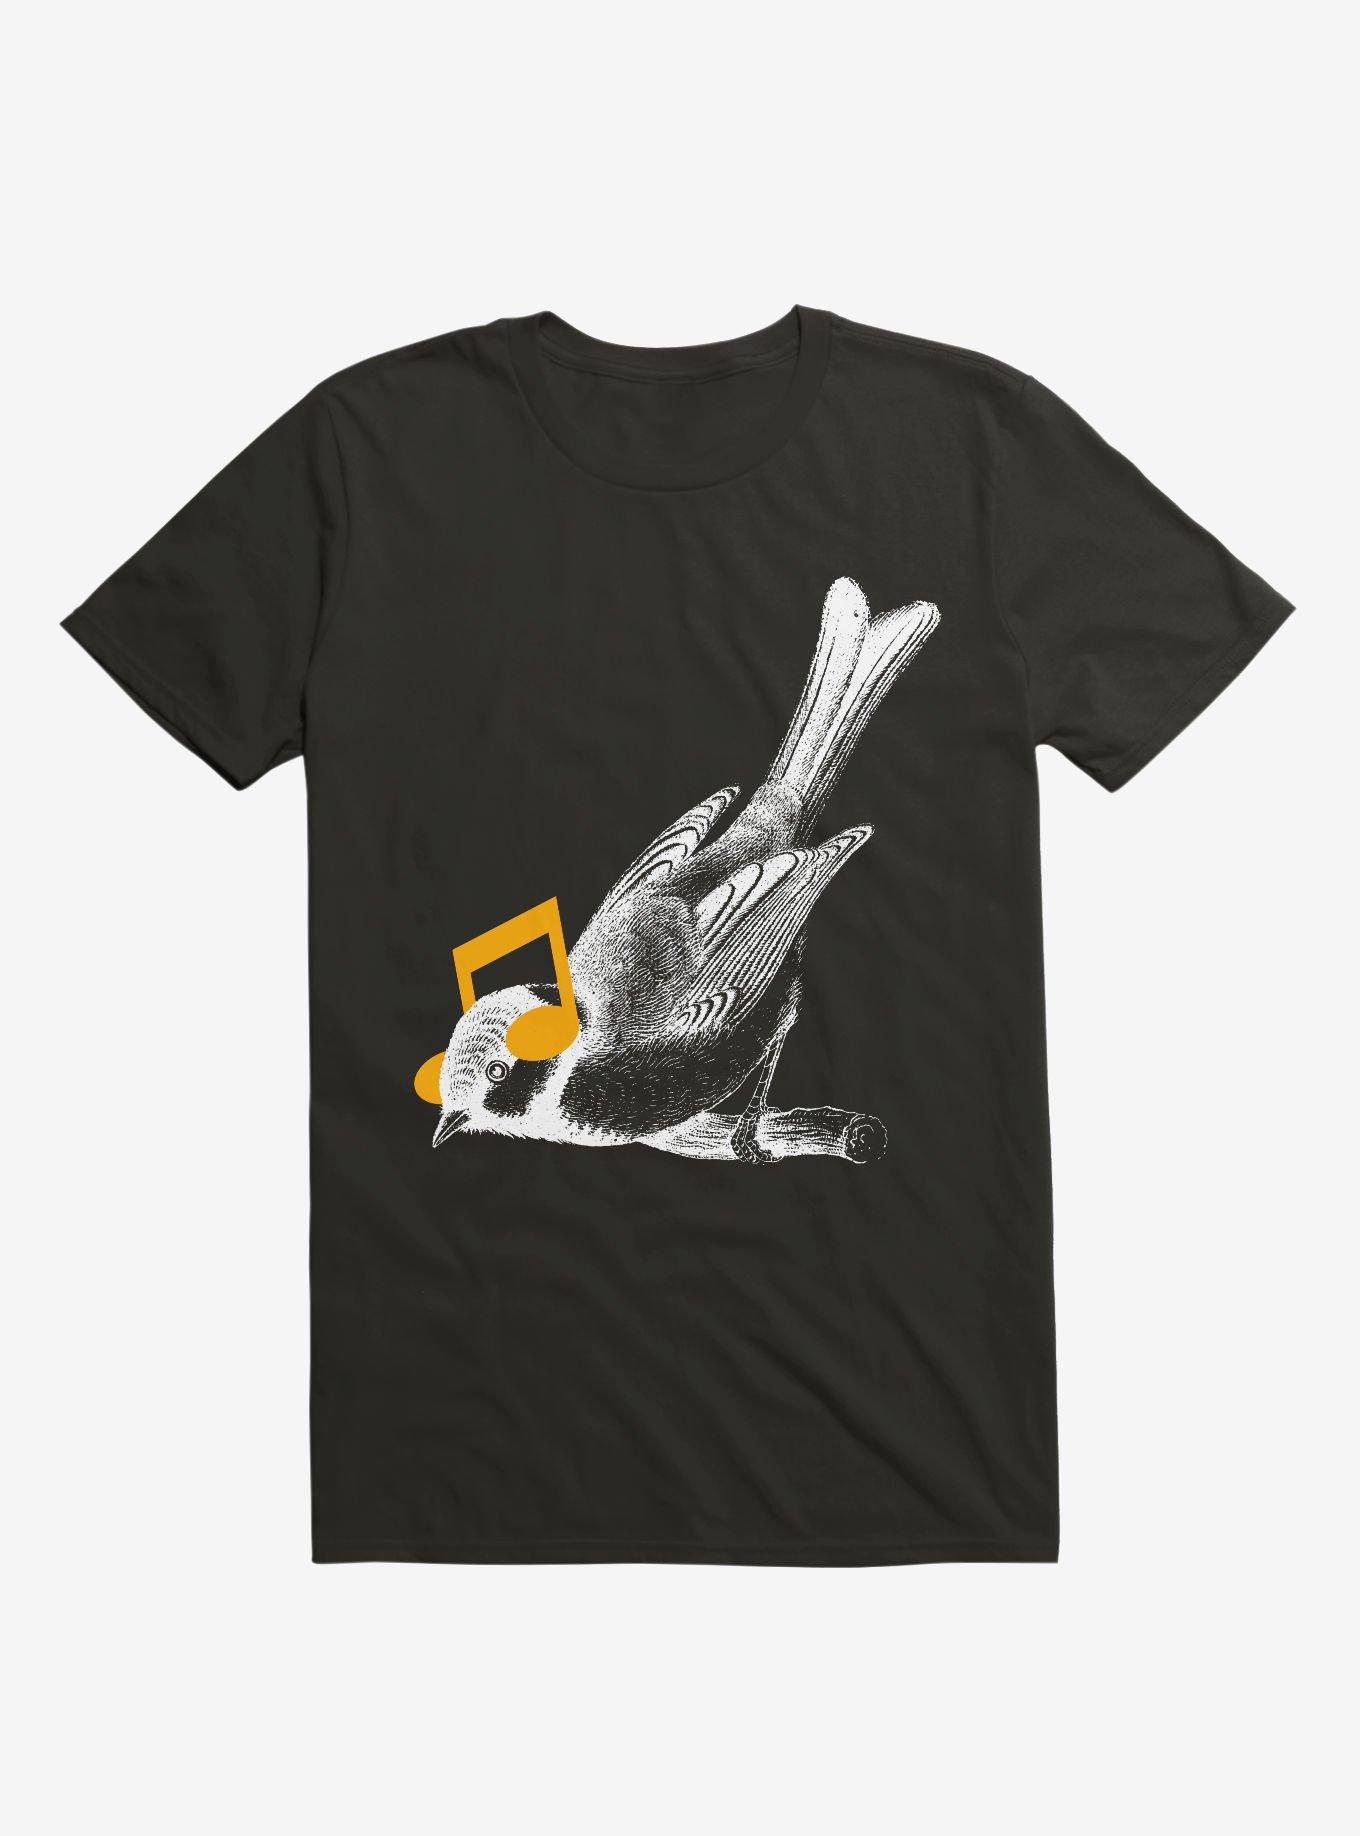 Listening To Your Heart T-Shirt, BLACK, hi-res